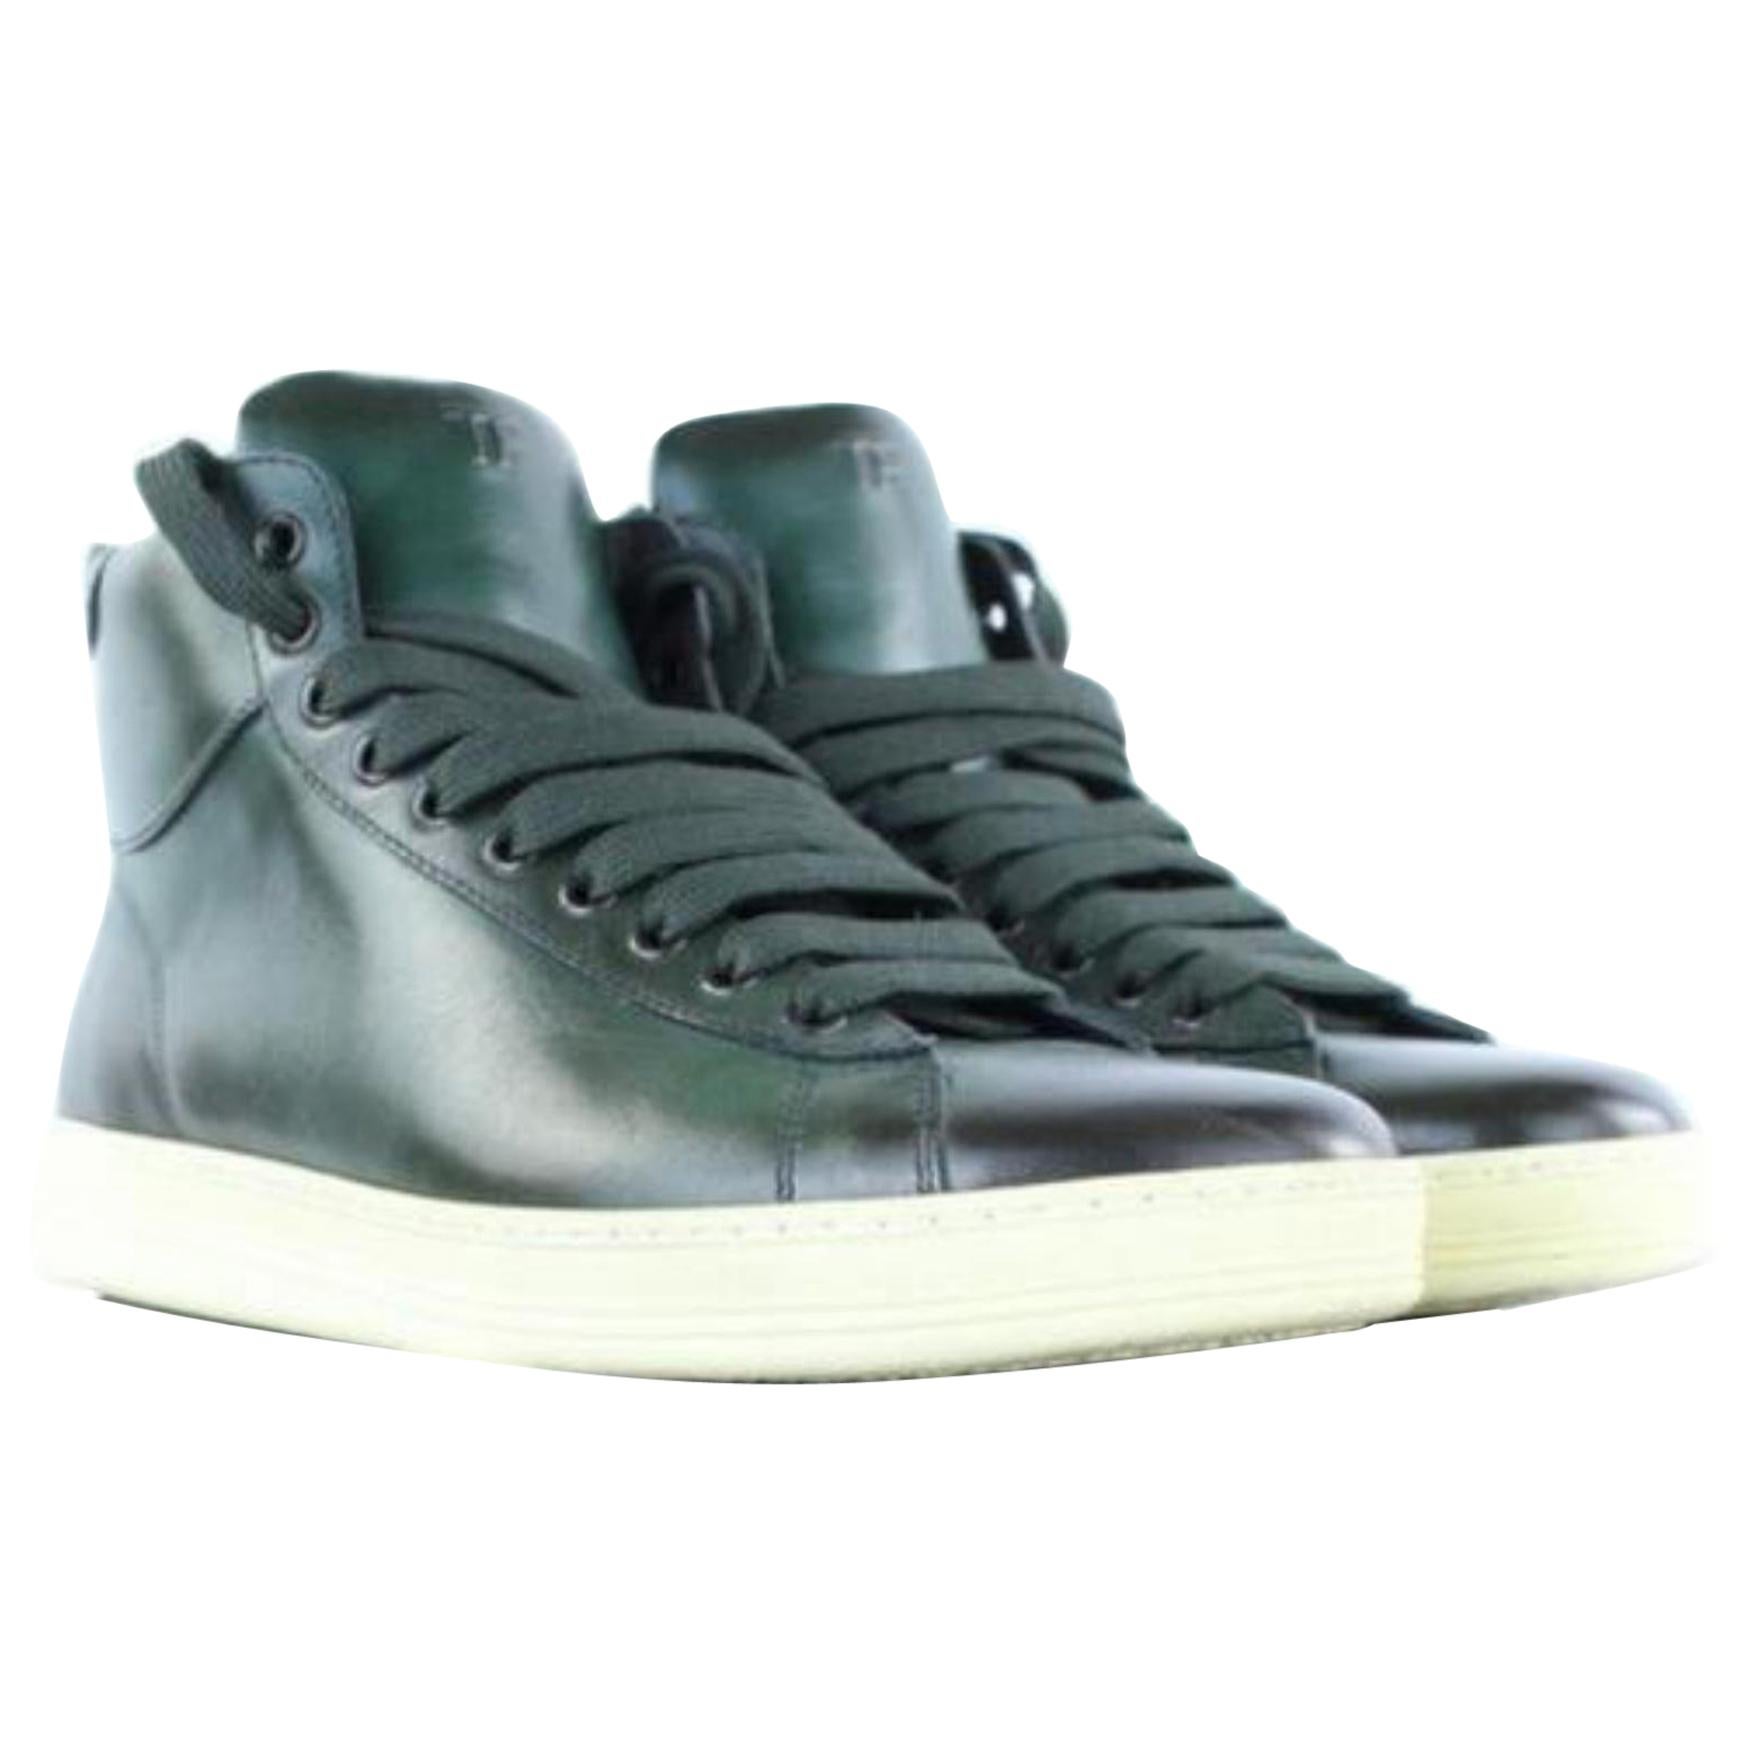 Tom Ford Green Russel Leather High Top Sneaker 2mj1020 Sneakers Boots/Booties For Sale